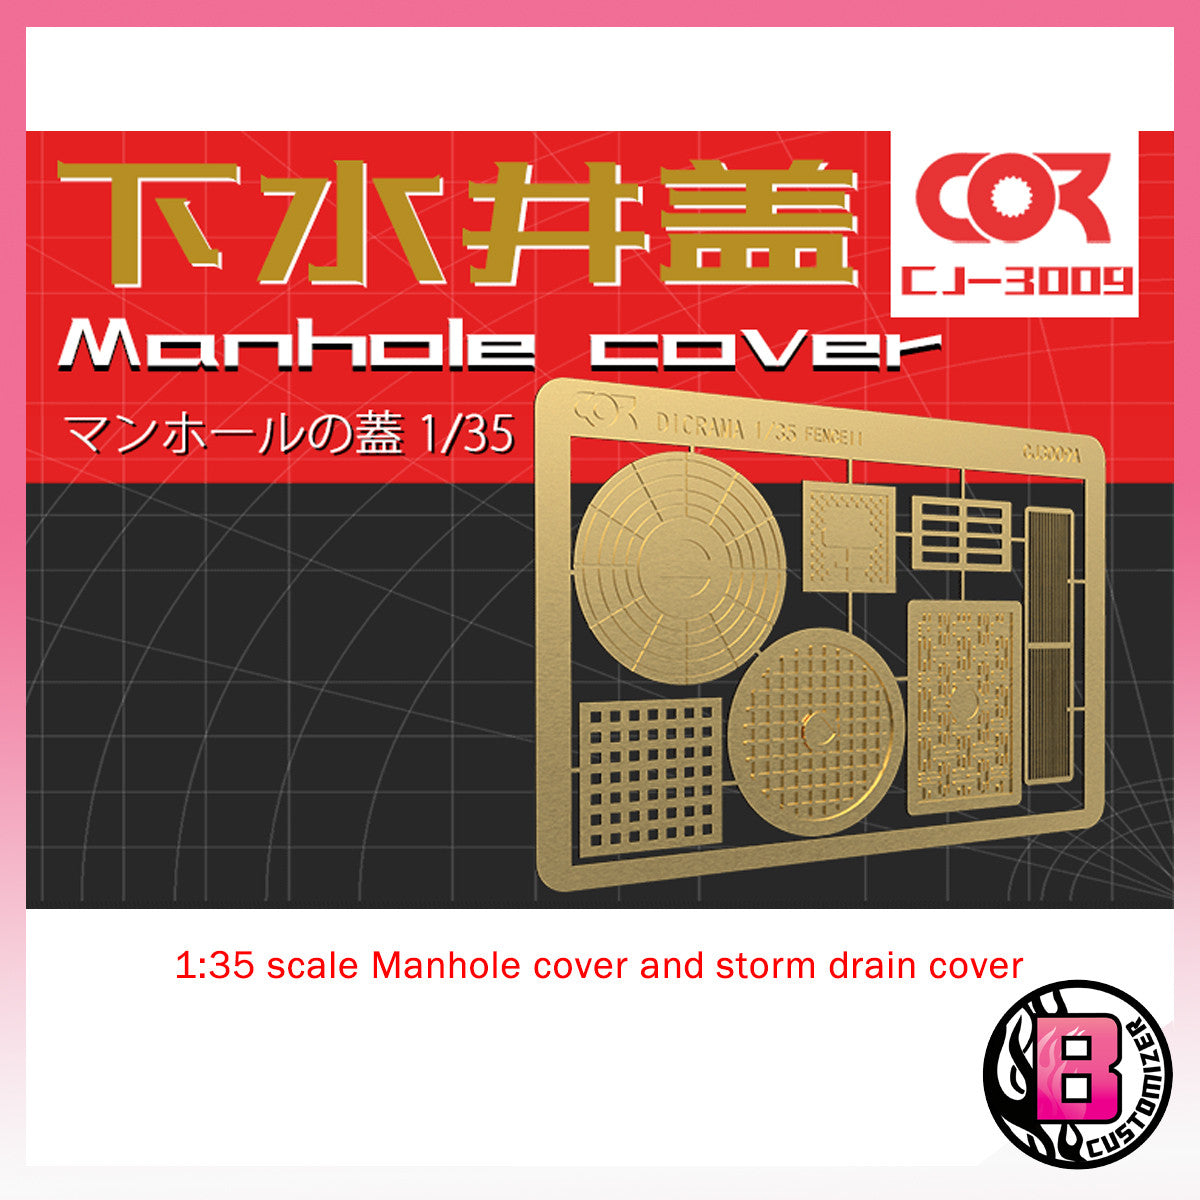 Cormake 1/35 scale Manhole cover and storm drain cover